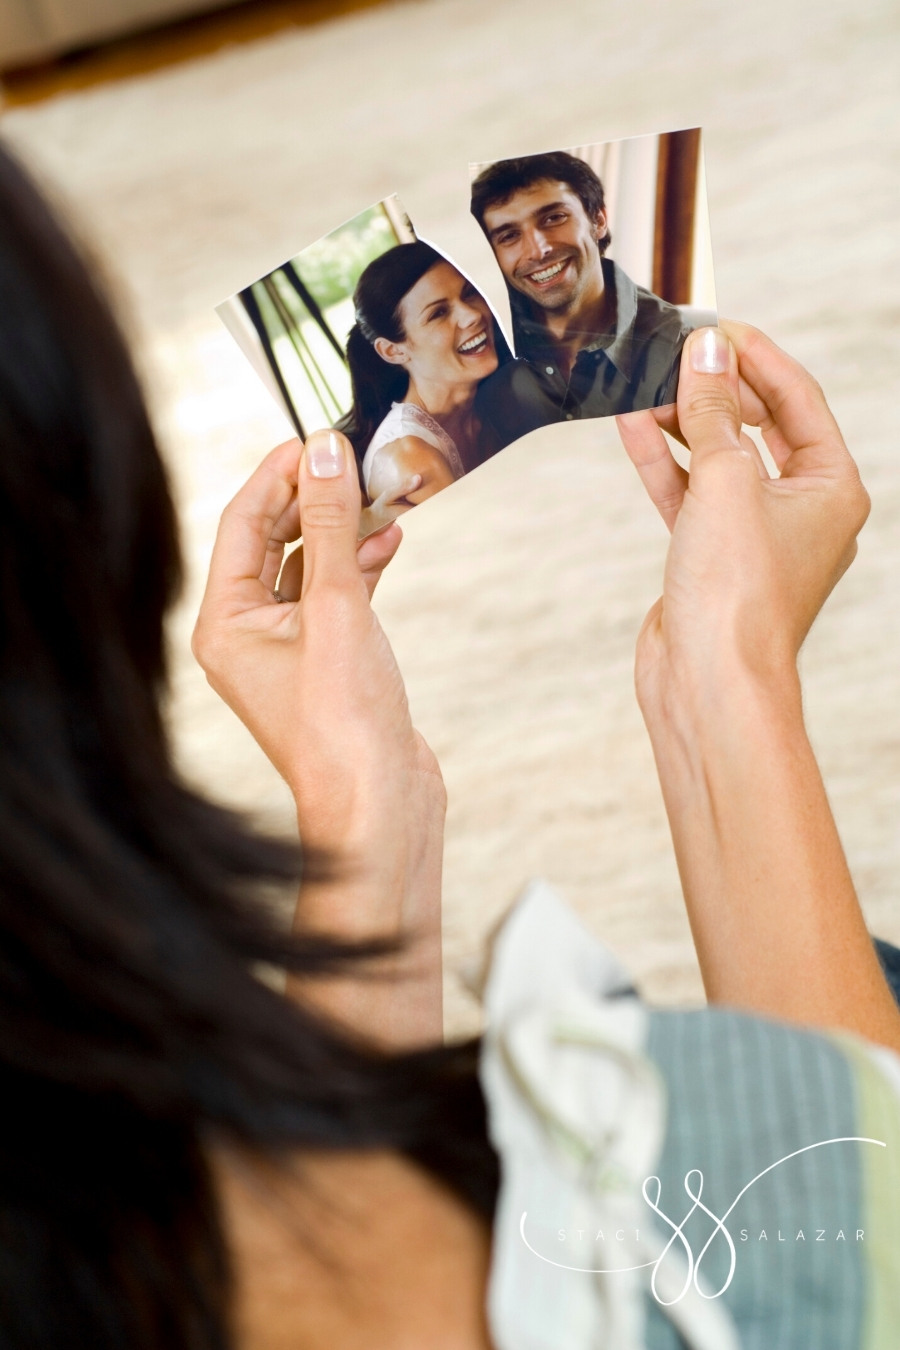 woman ripping a photograph of a smiling couple